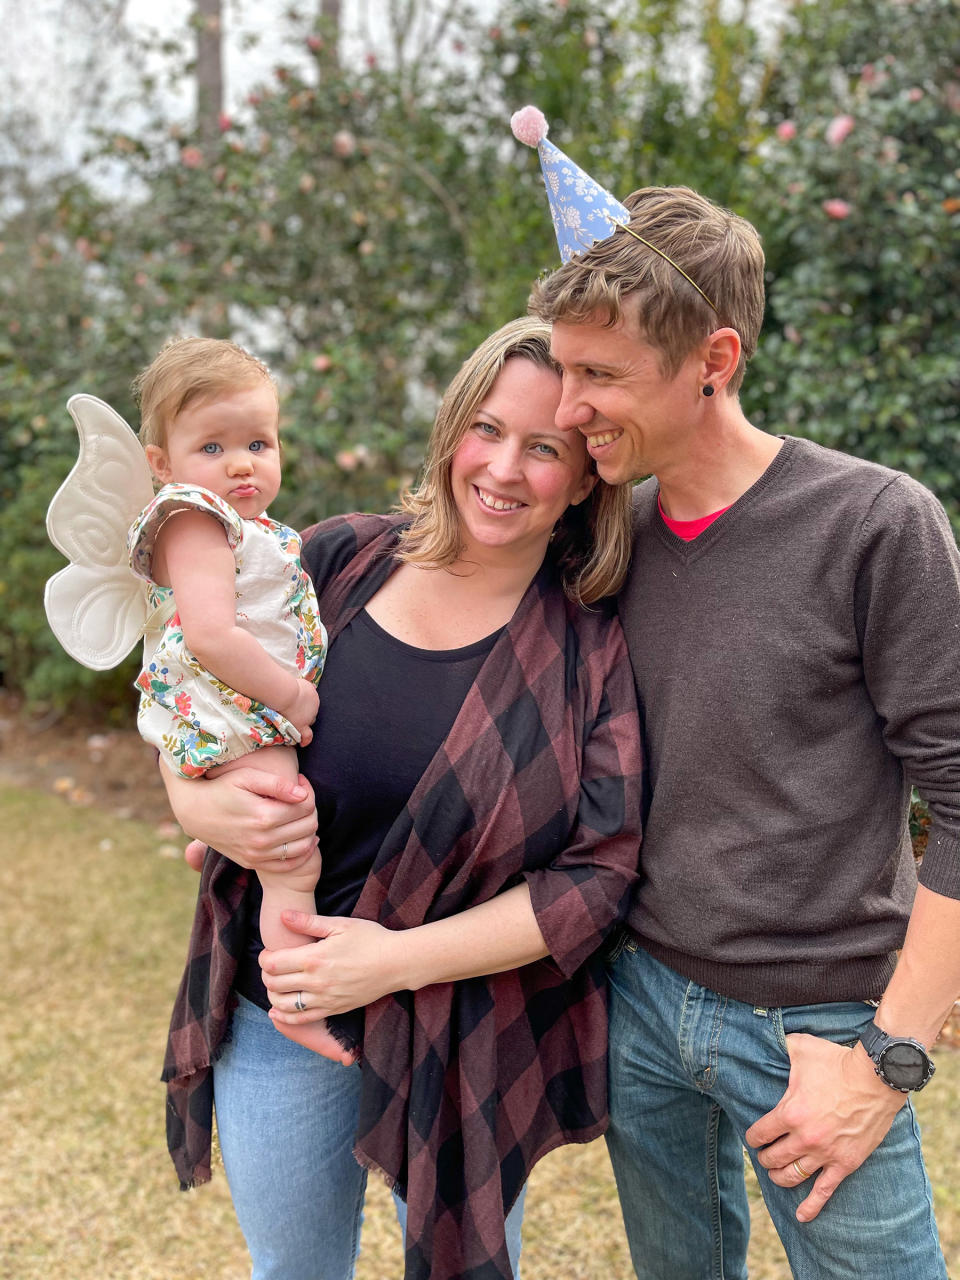 The author with her partner and daughter in Dothan, Ala., in February 2022.<span class="copyright">Courtesy Karie Fugett</span>